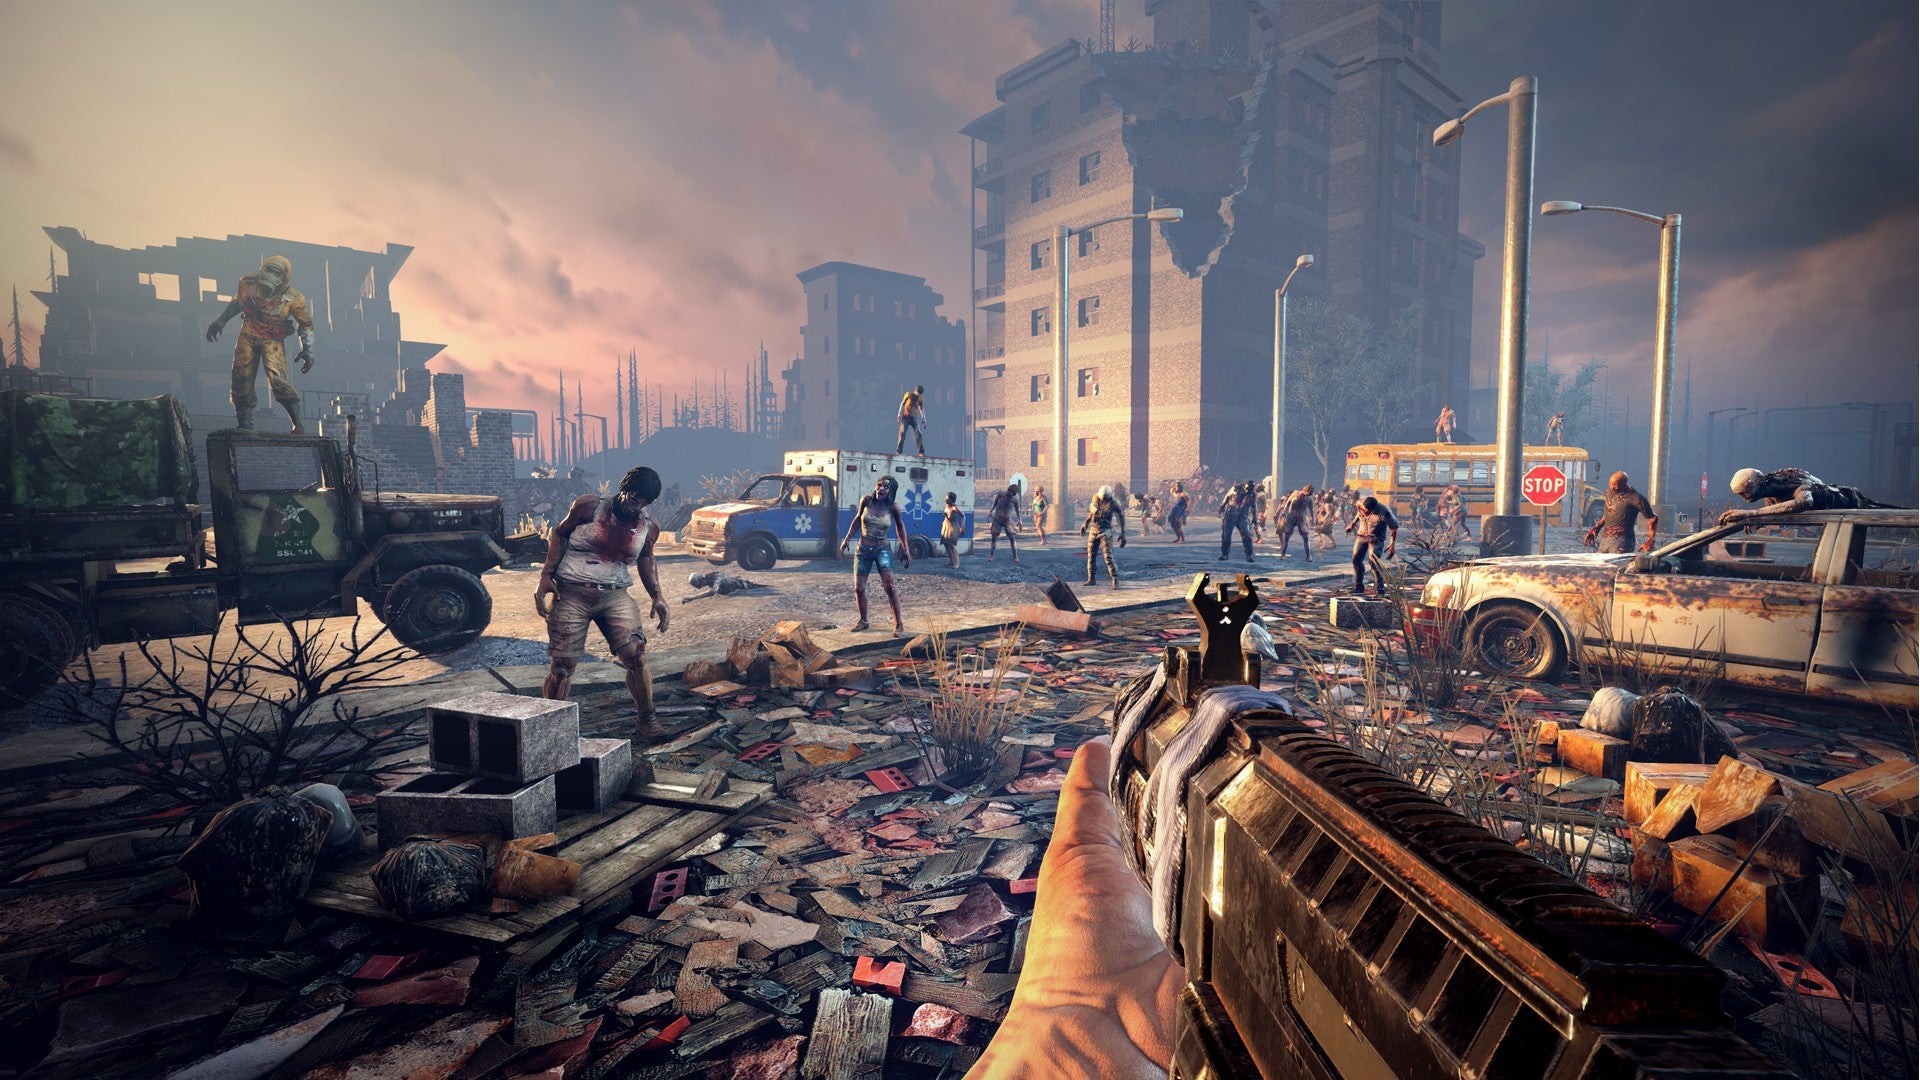 7 Days to Die image showing a player aiming an assault rifle towards a horde of zombies amidst ruined buildings.